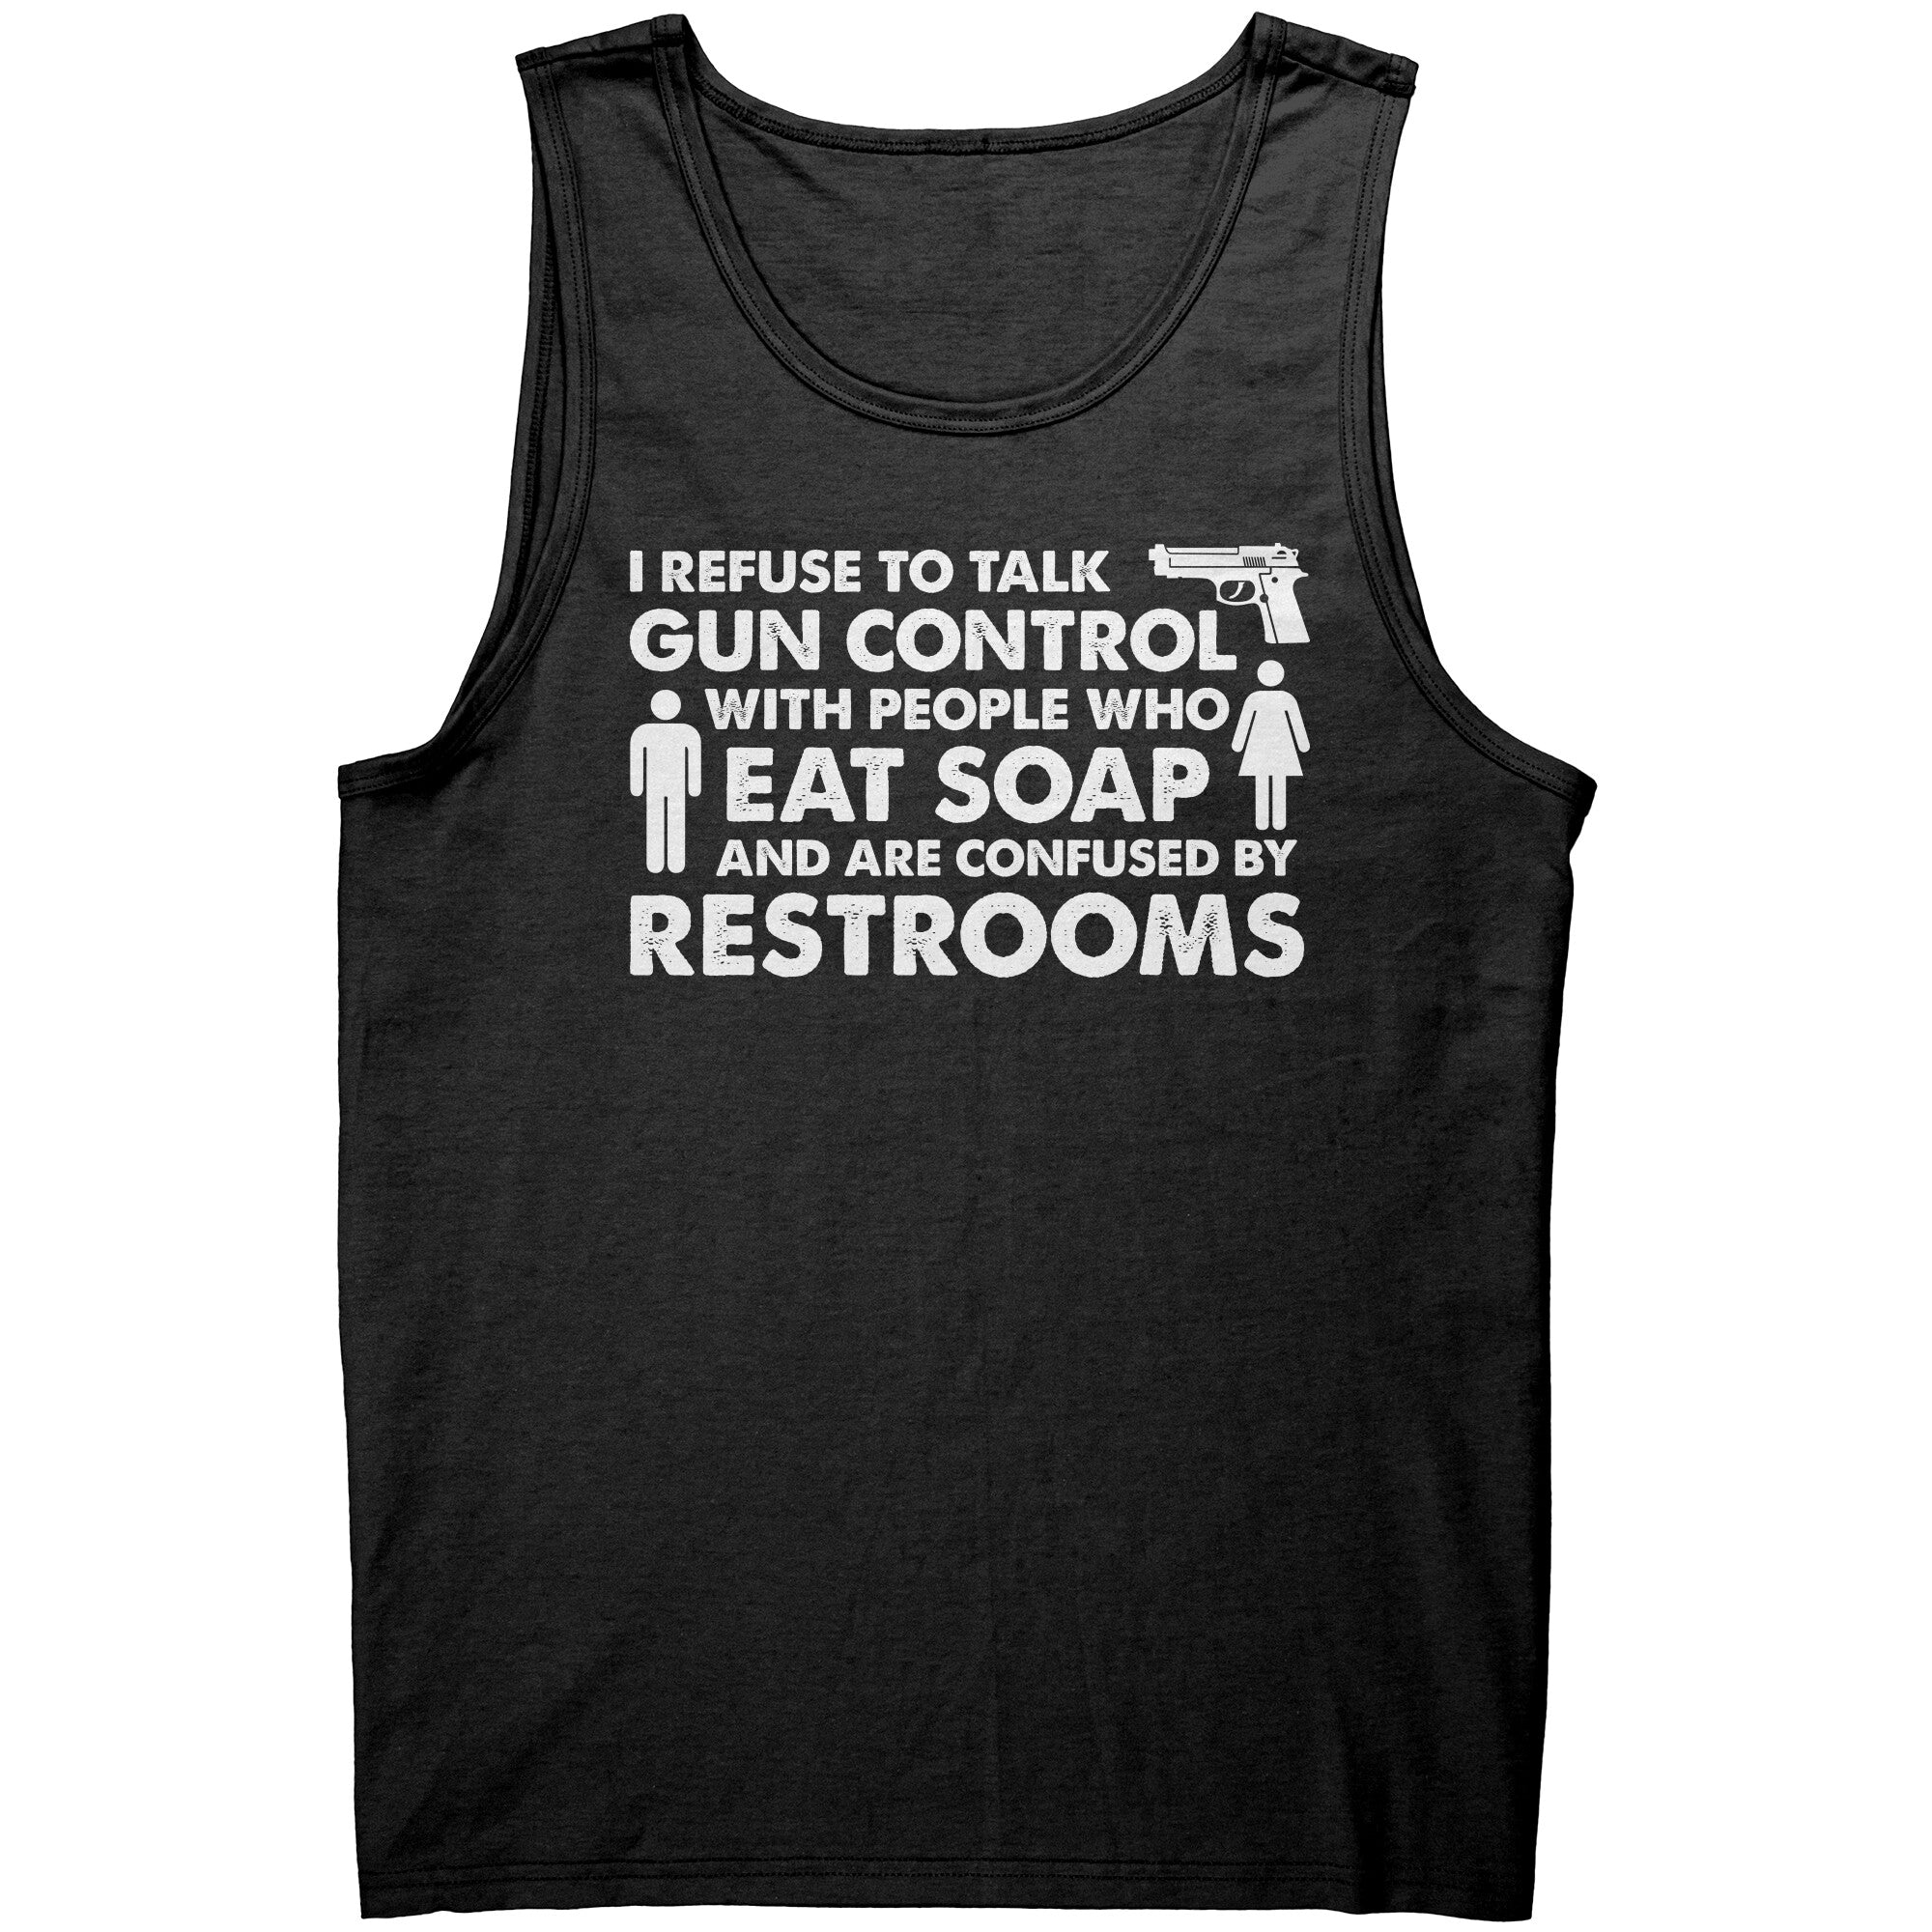 I Refuse To Talk Gun Control With People Confused By Restrooms -Apparel | Drunk America 